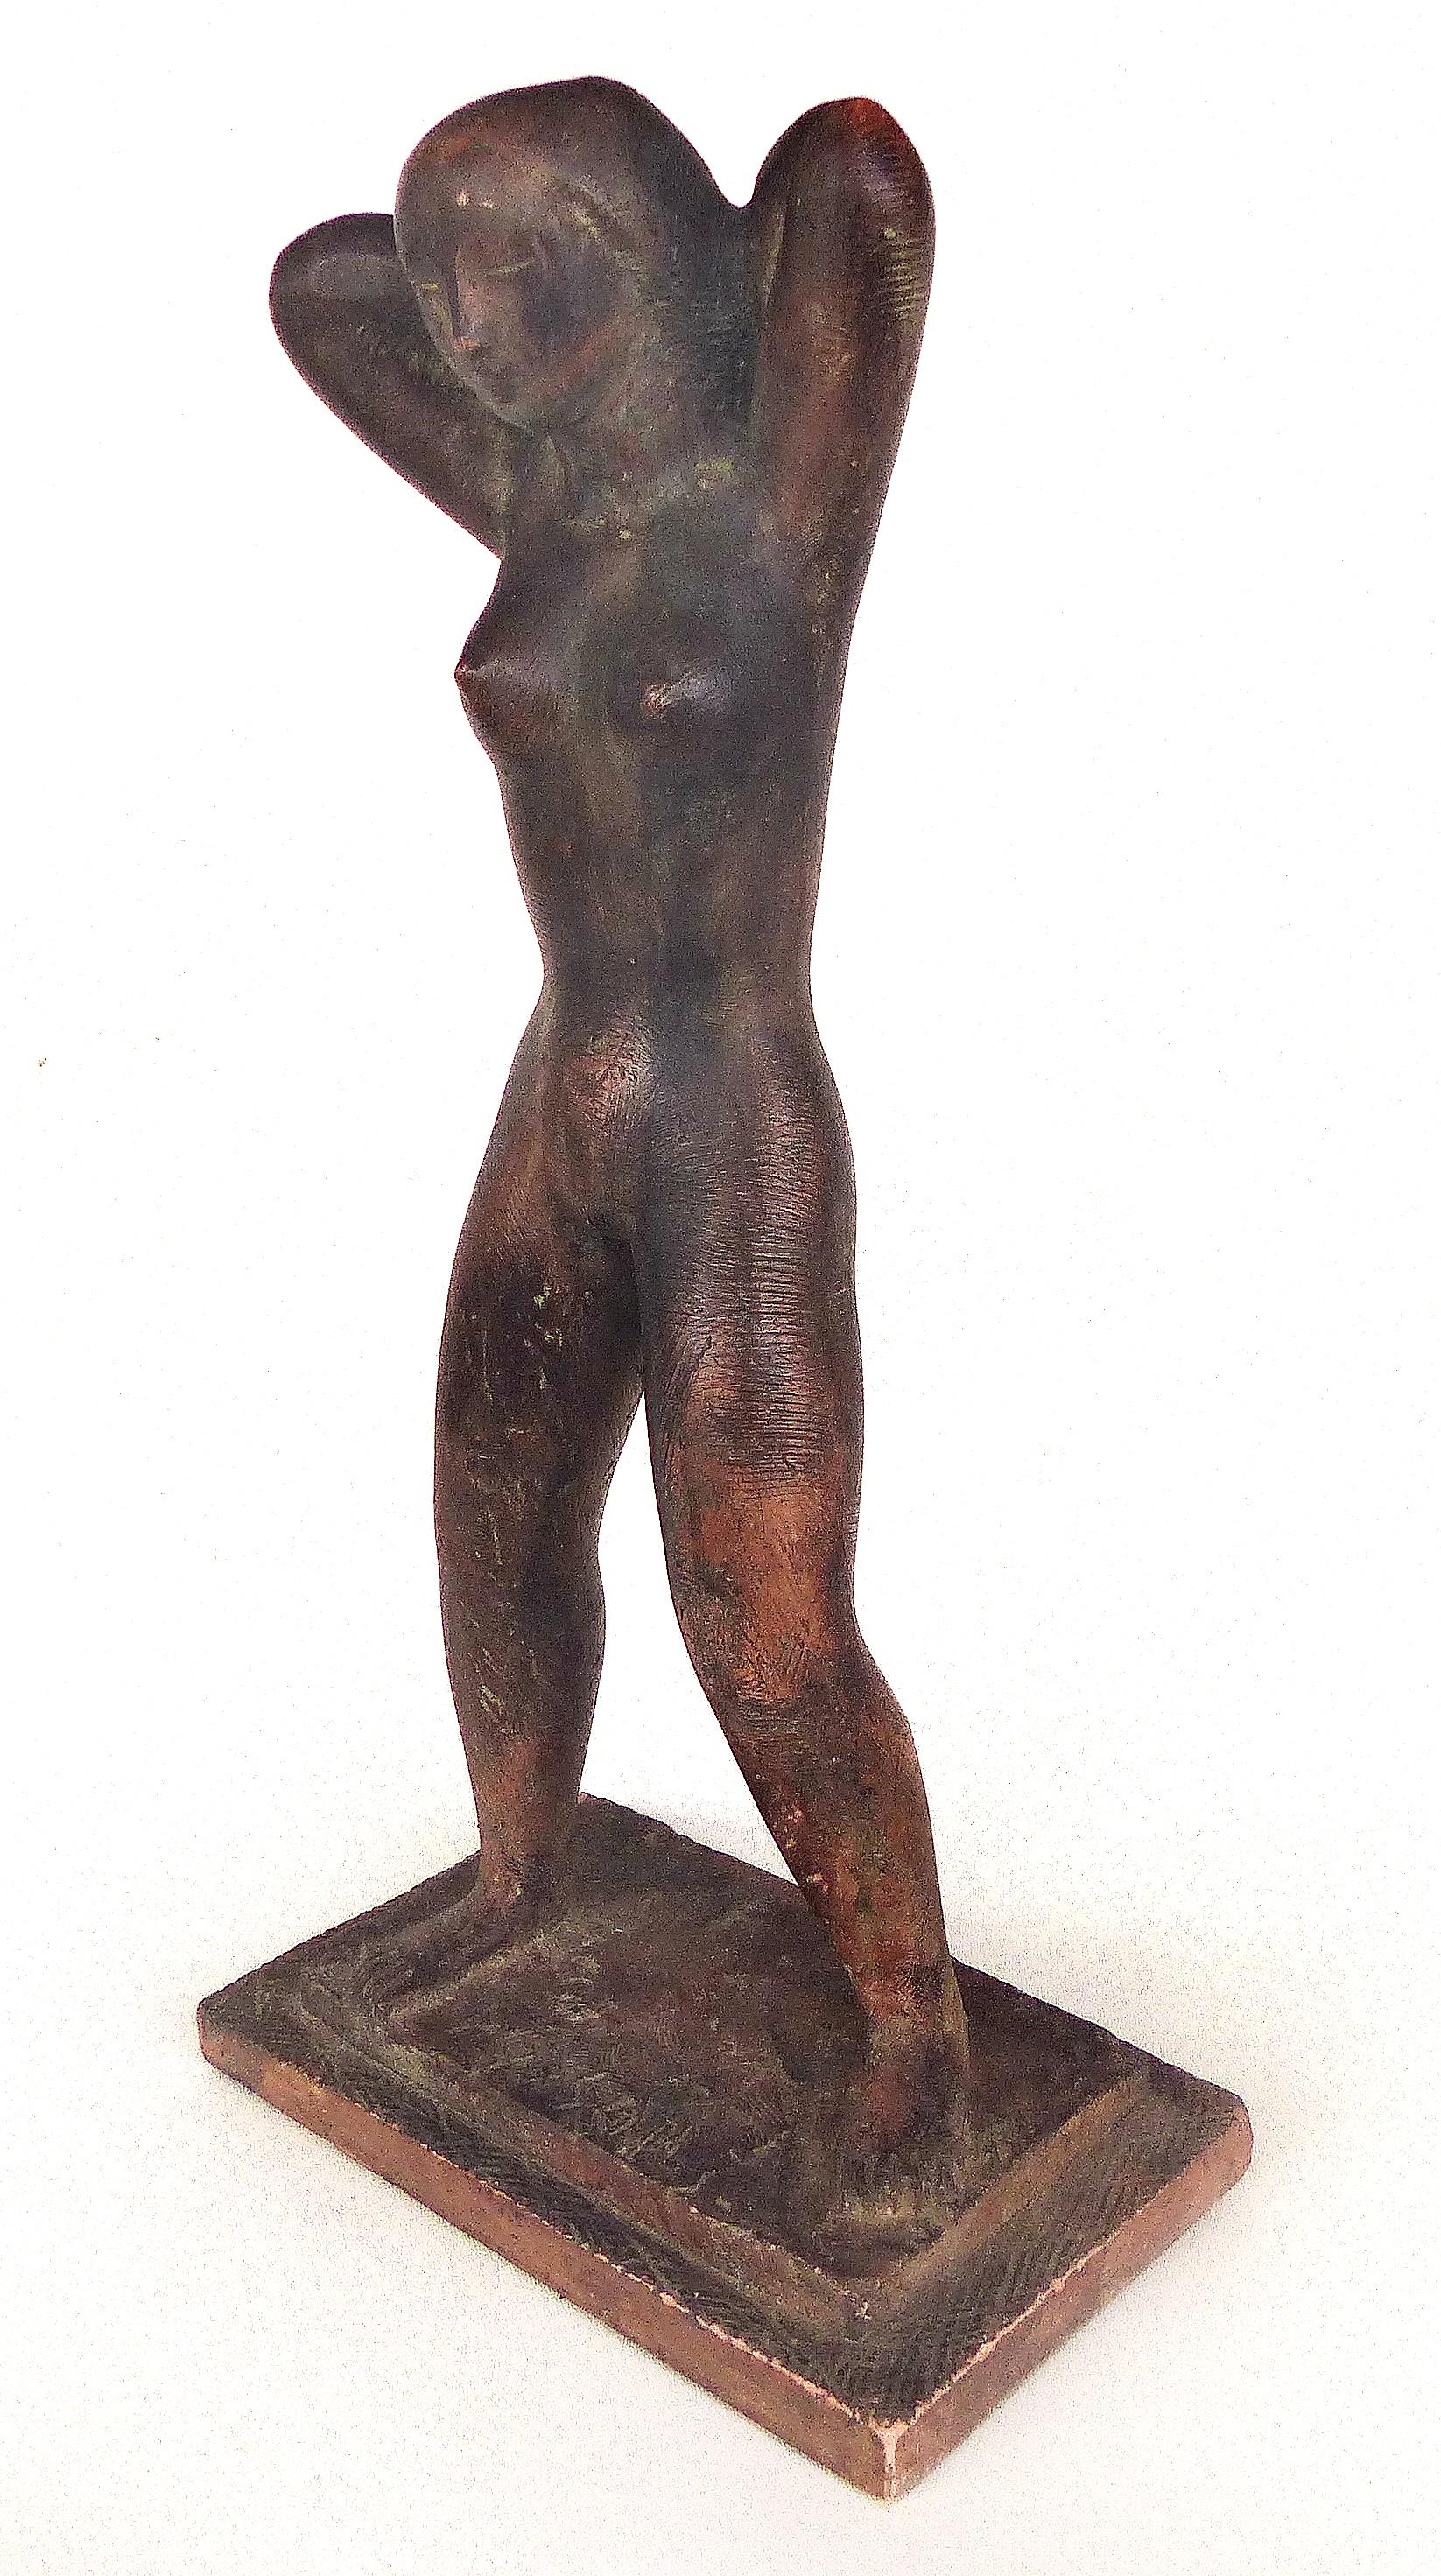 Offered for sale is a cast composition sculpture of a standing nude by artist Chuck Dodson. Dodson was an architect turned sculptor that was a resident artist at the Grove House in Coconut Grove, FL. His sculptures were predominantly of female nudes